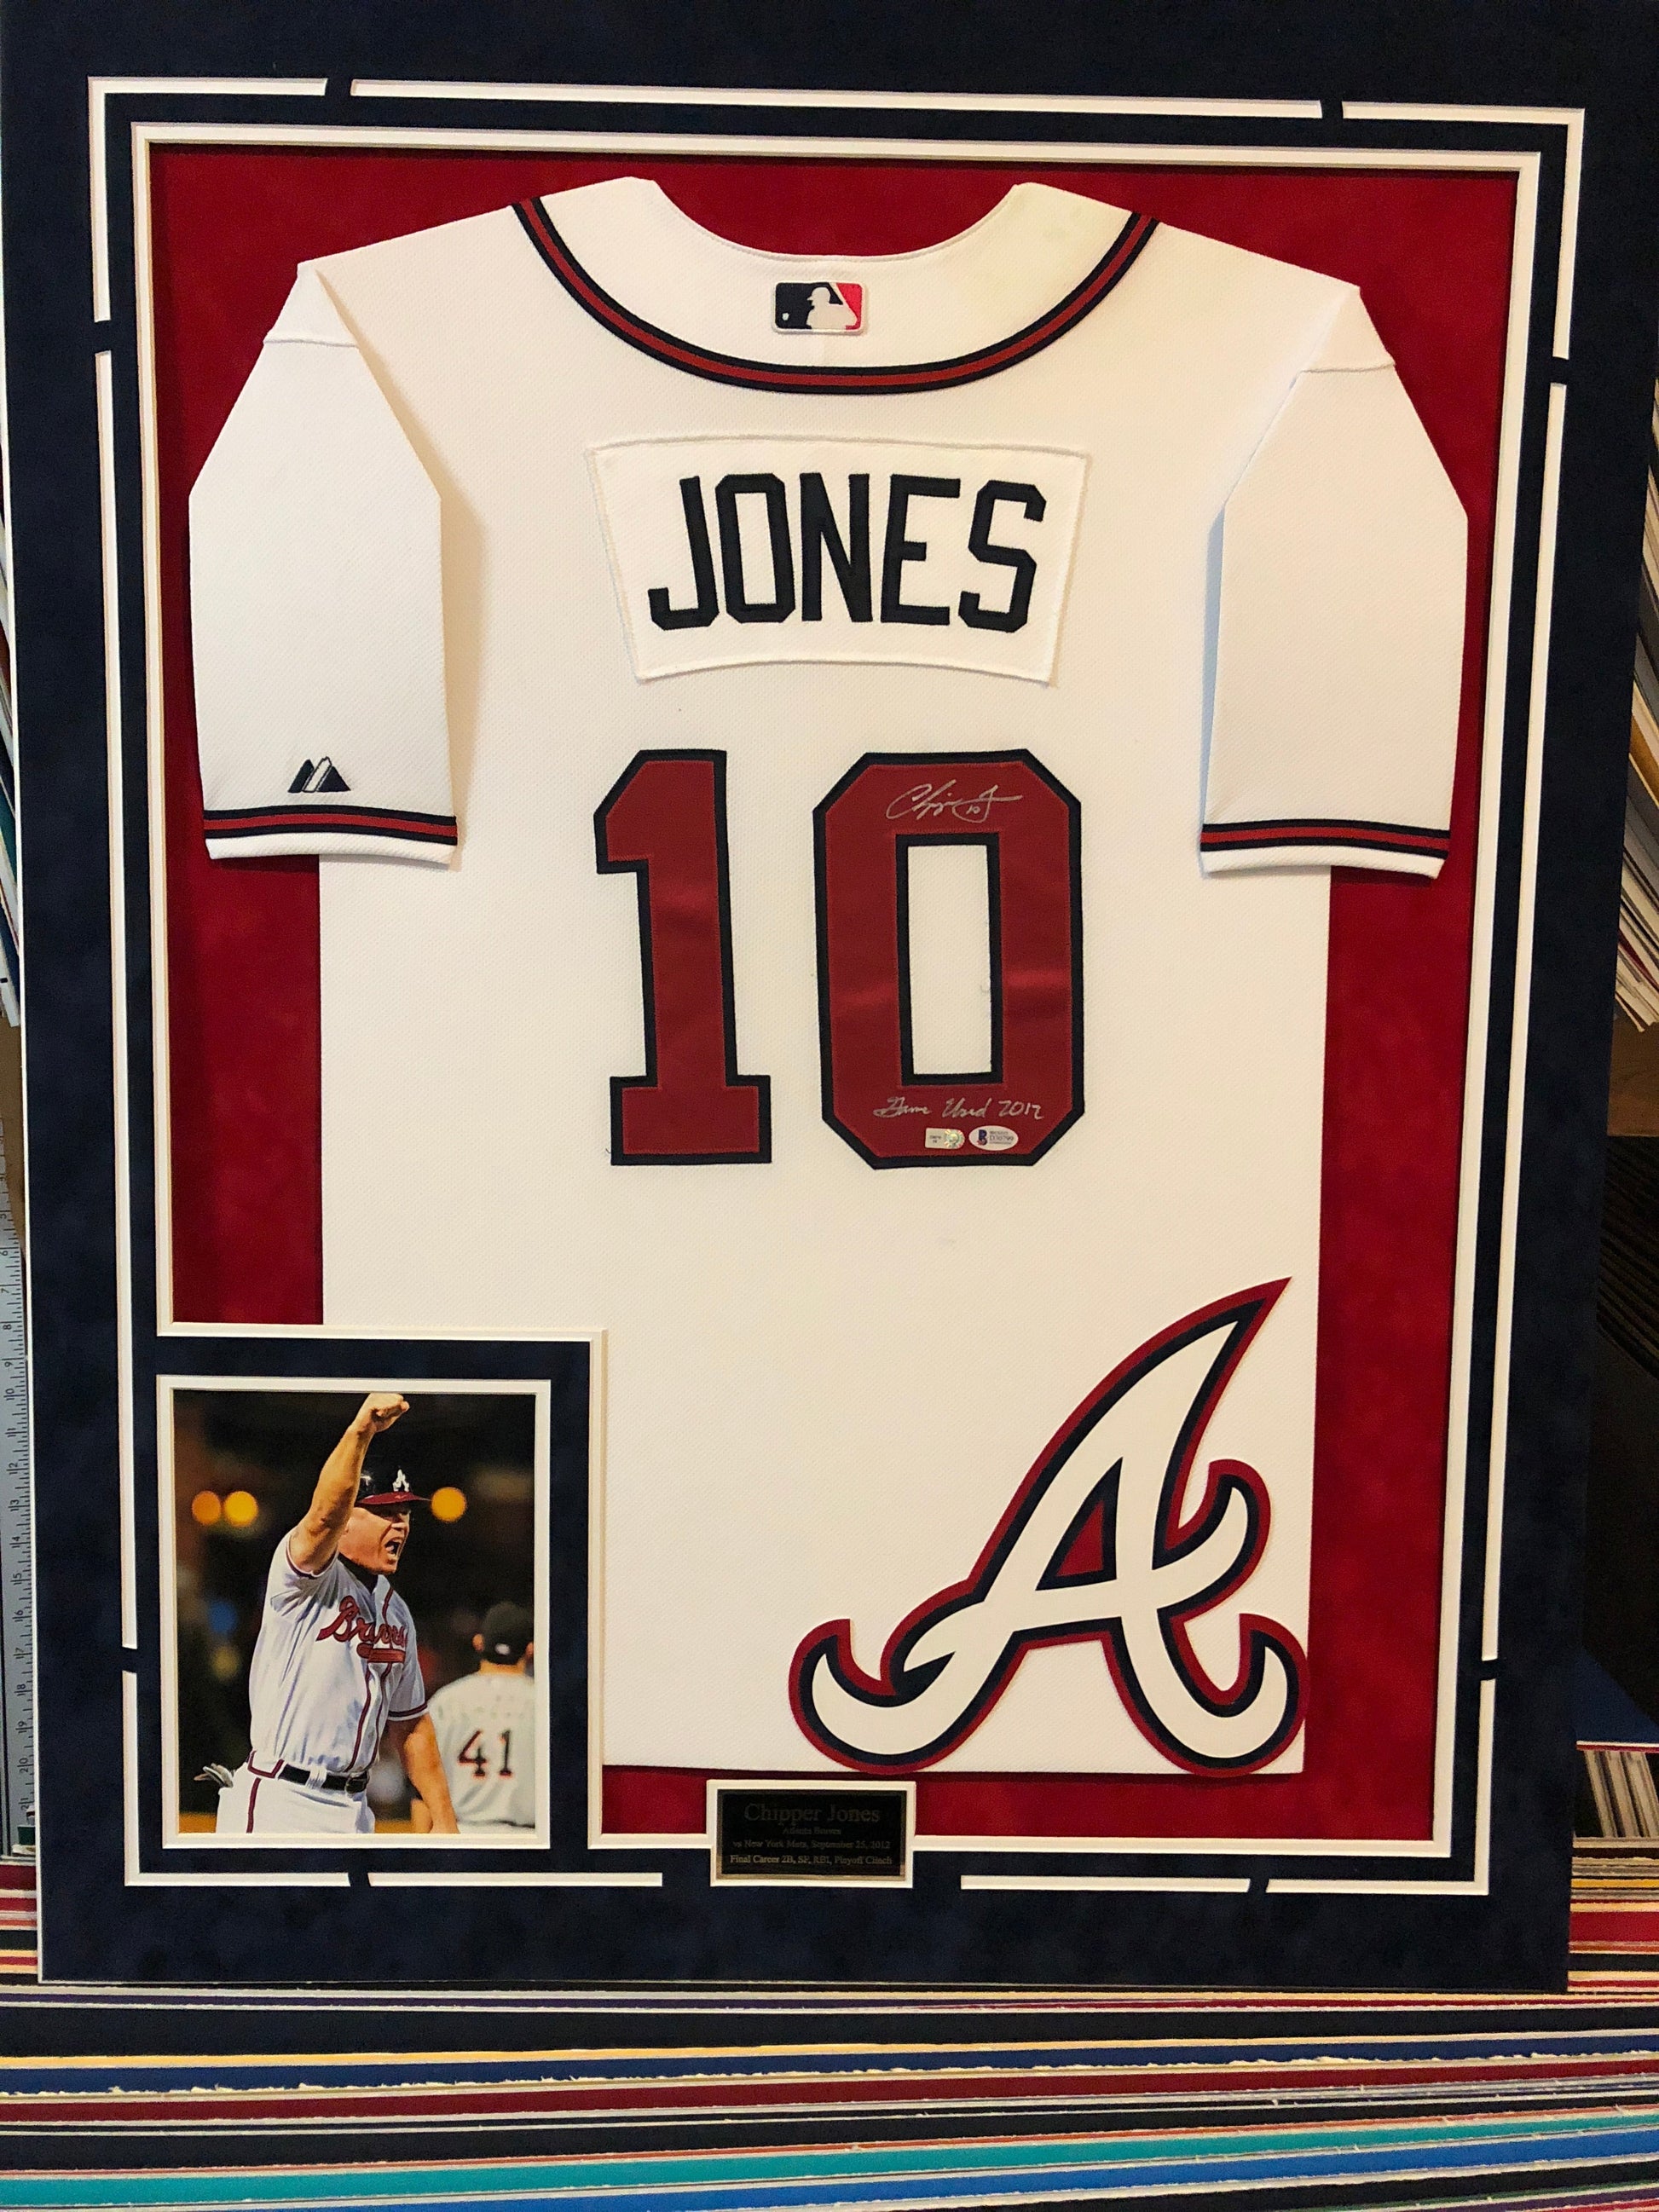 MVP Authentics - Framing Custom Framing - 1 photo vertical layout with floating logo and suede matting 225 sports jersey framing , jersey framing